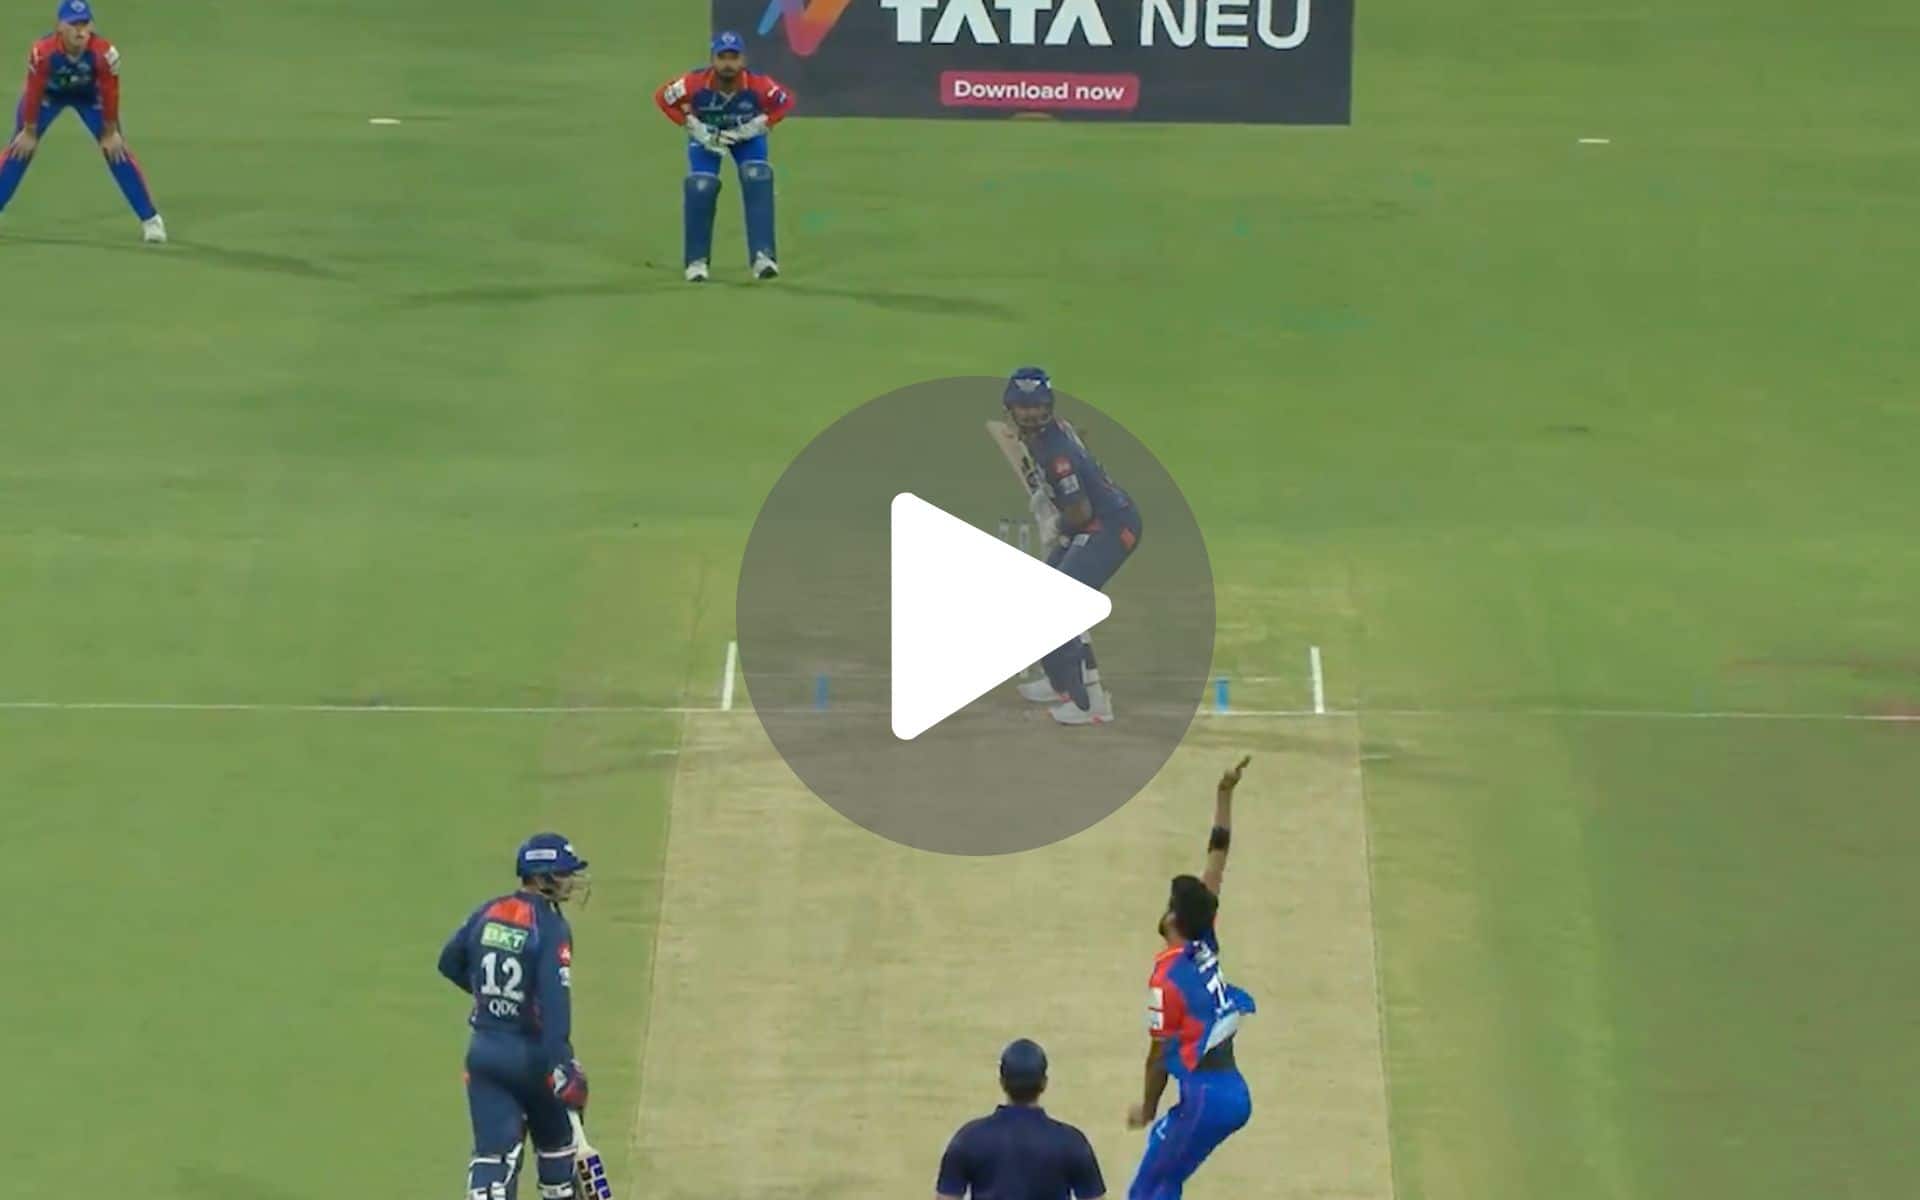 [Watch] KL Rahul Stamps Authority Against Pant's DC With Magnificent Six Over Extra Cover